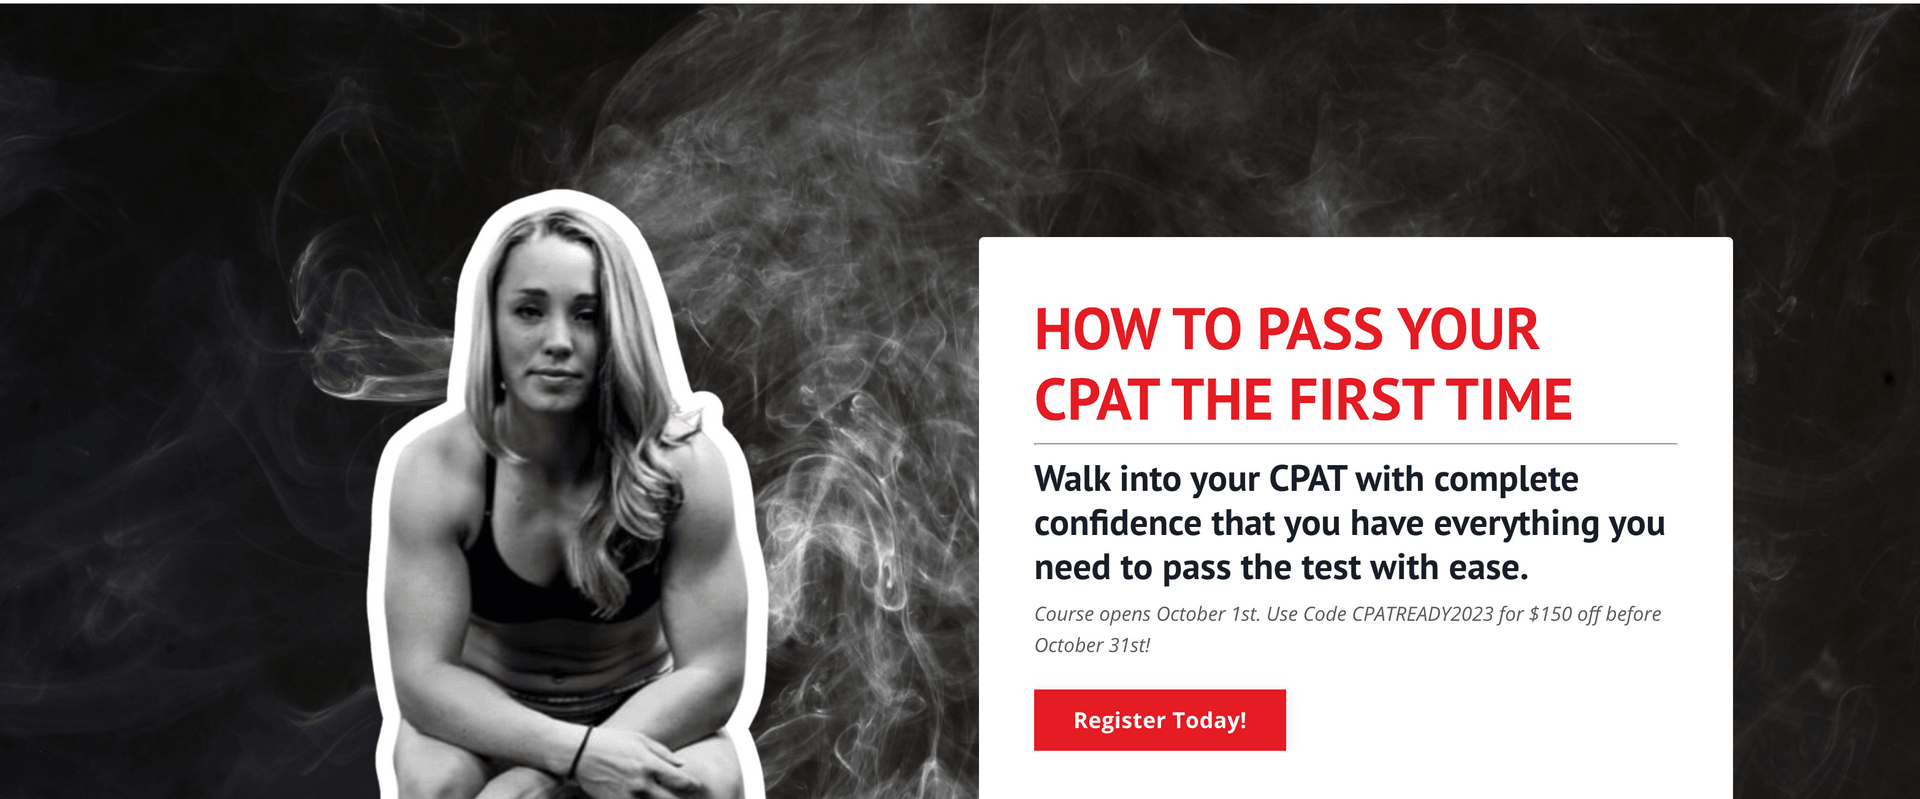 How to Pass the CPAT